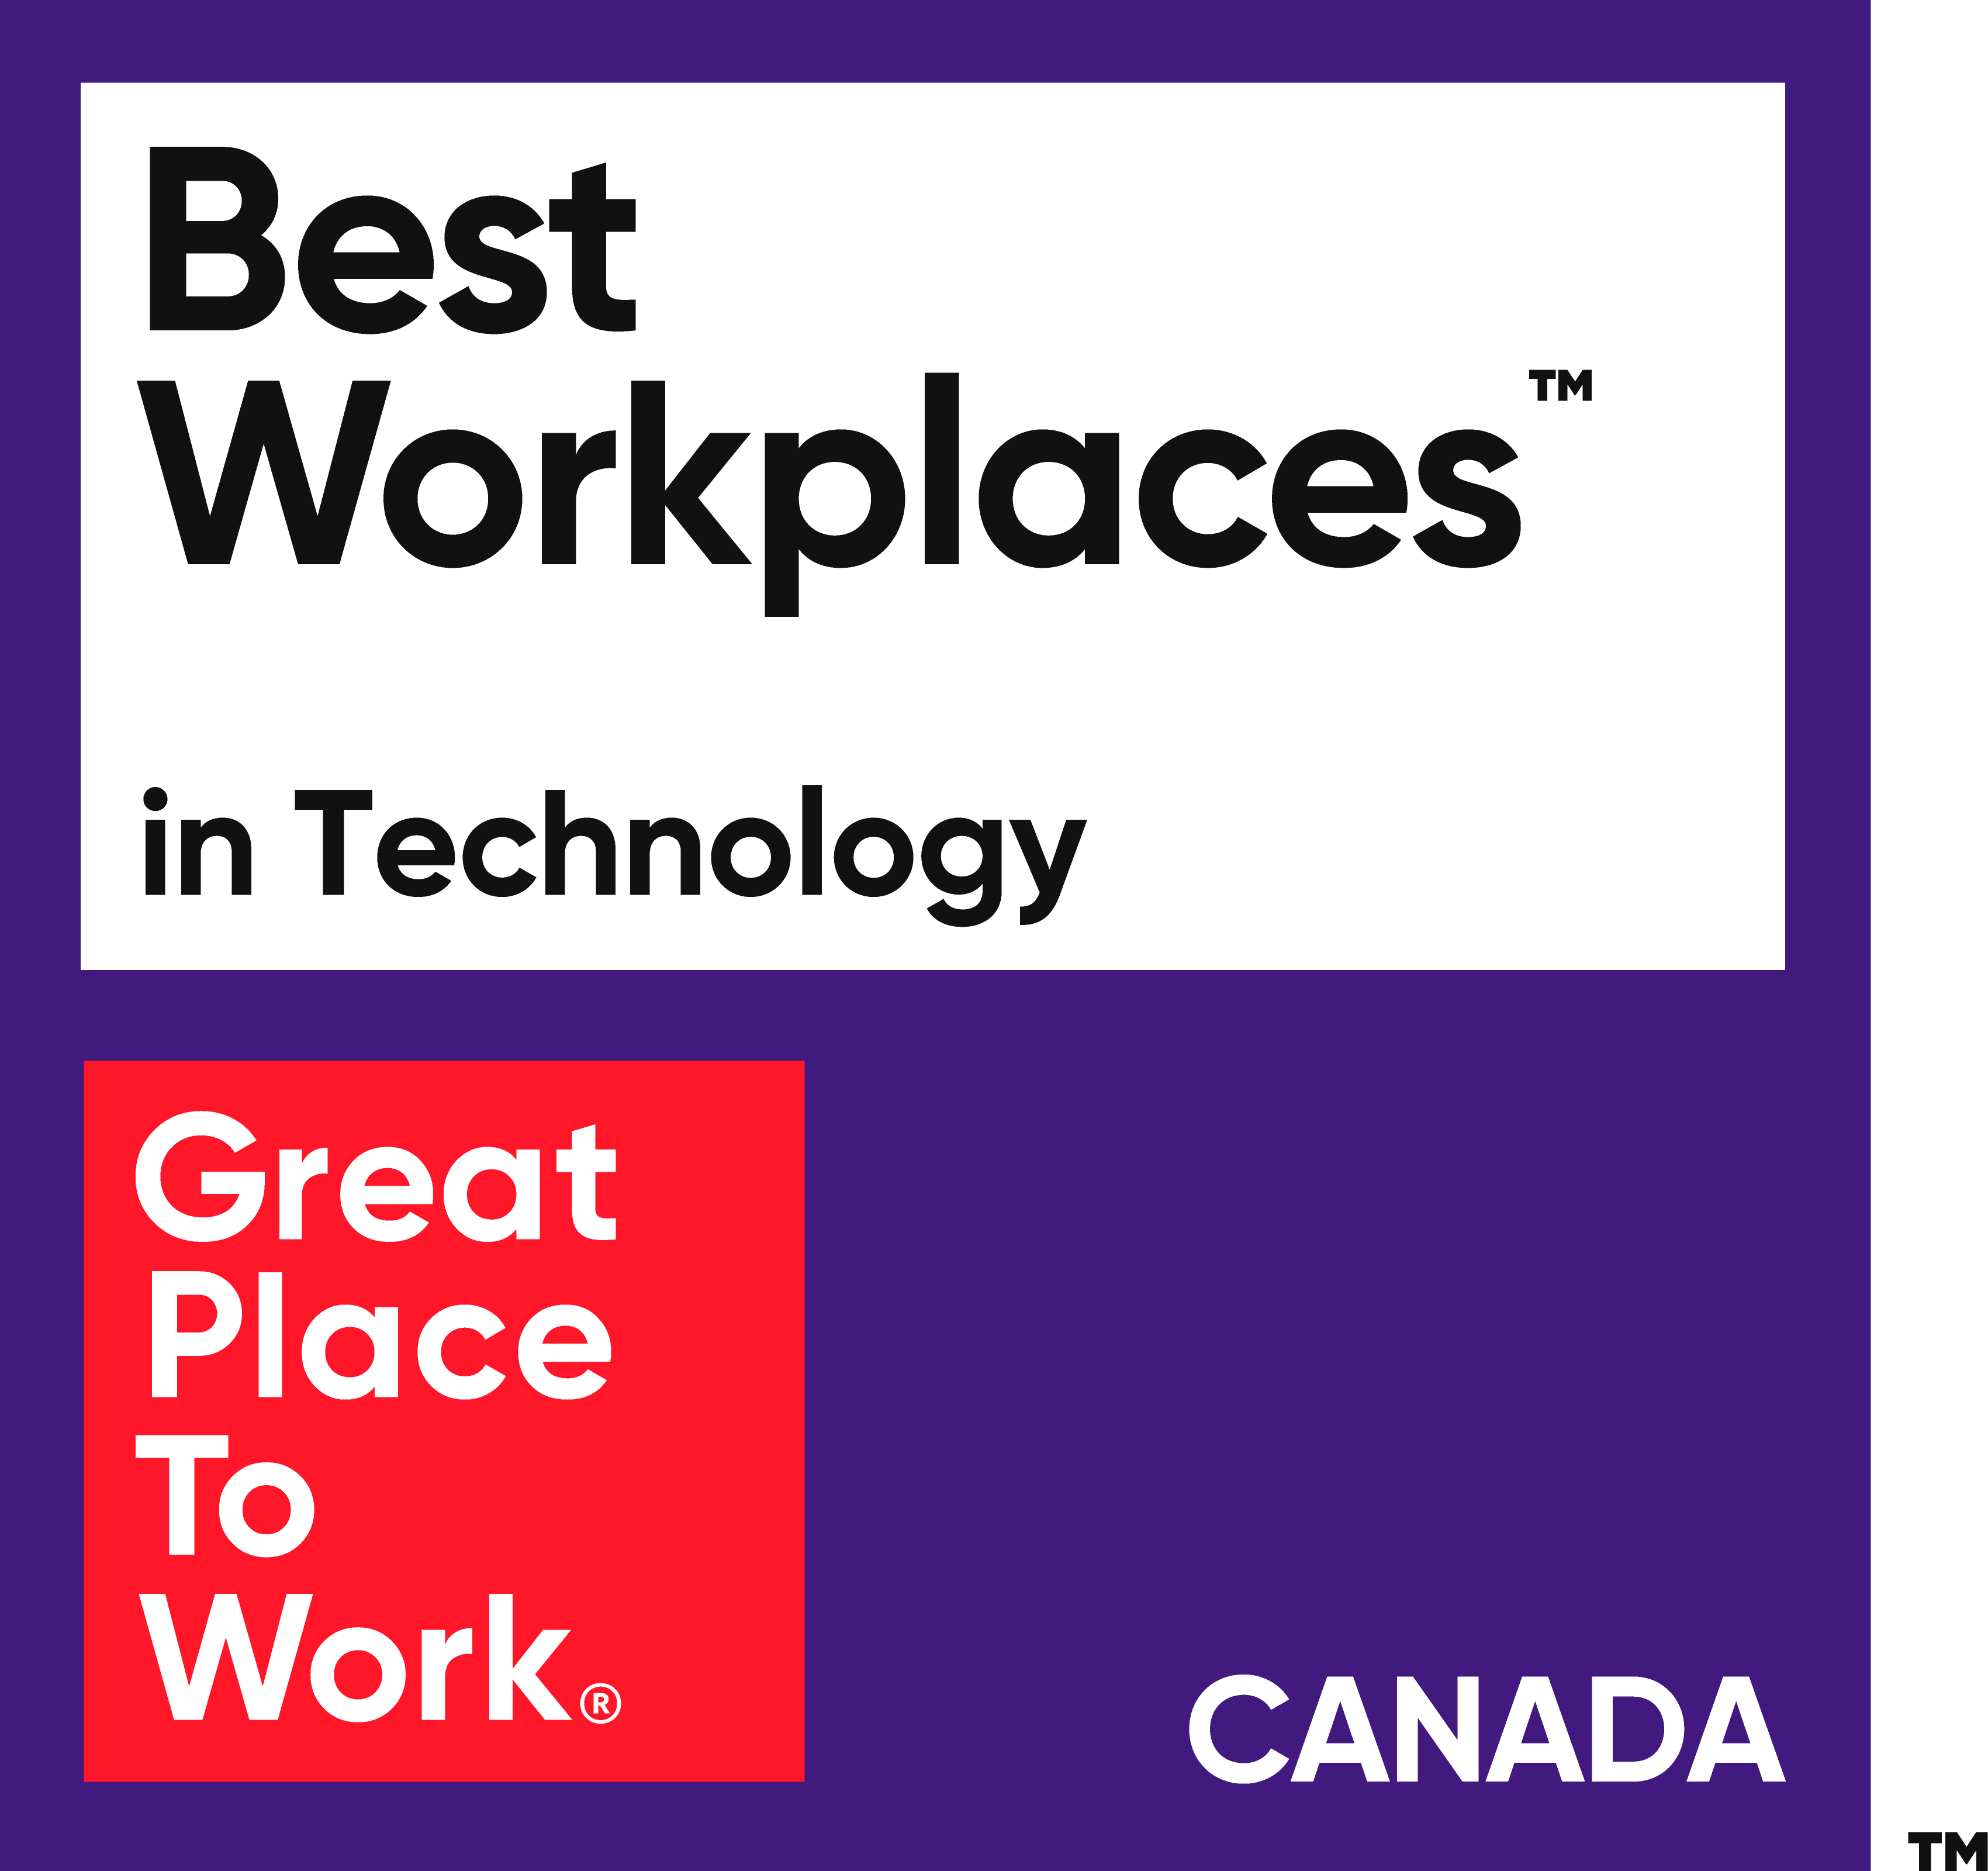 Best Workplaces in Technology